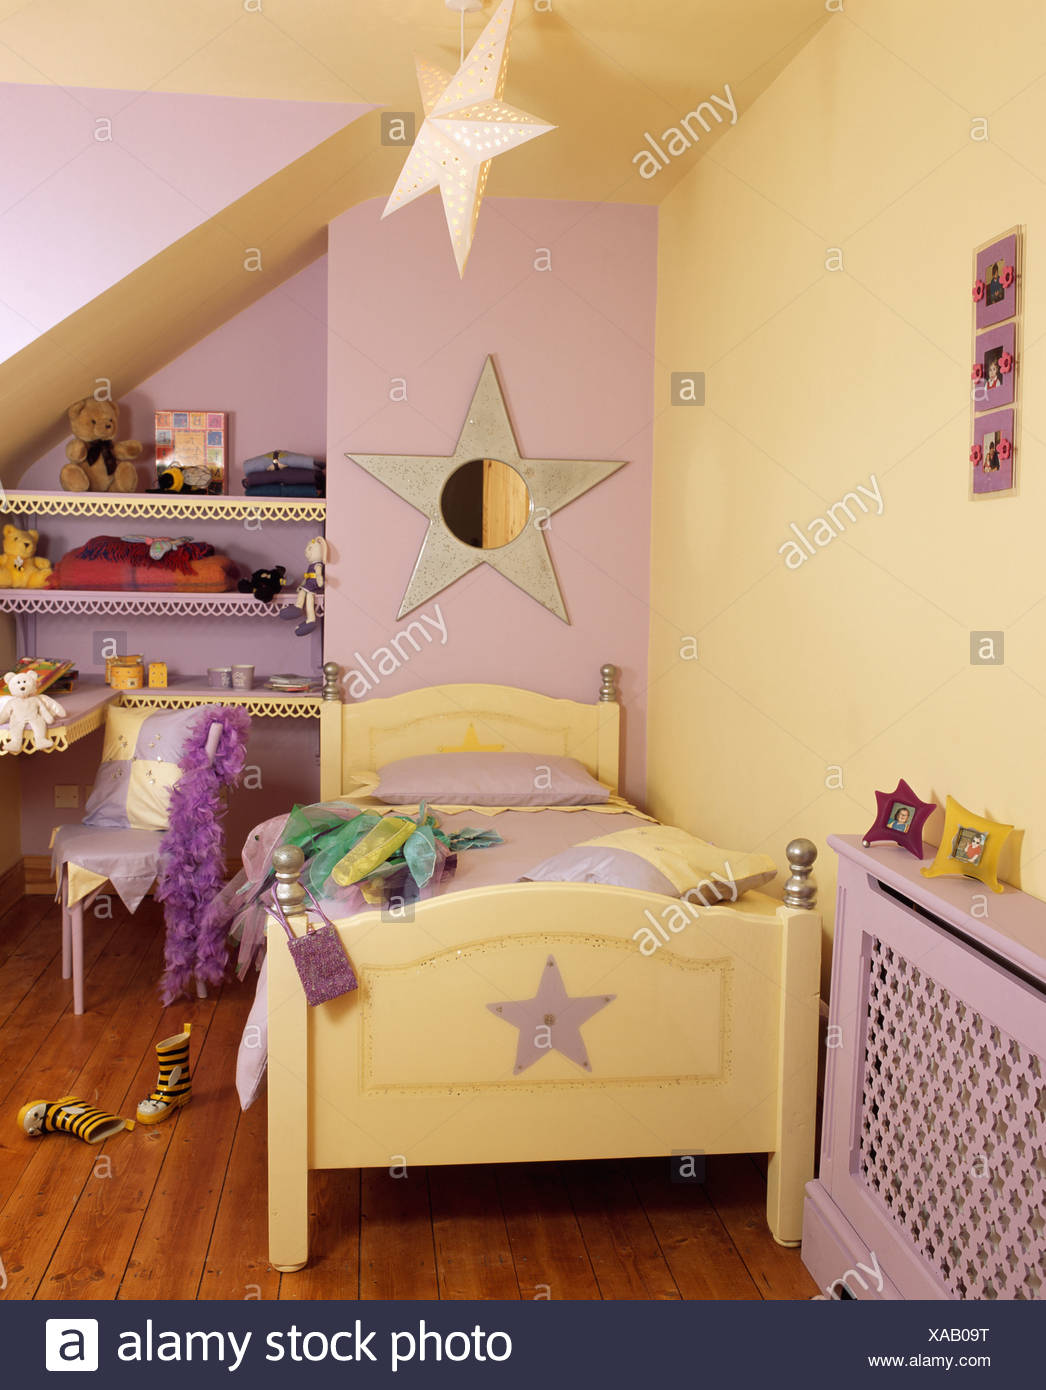 Child S Bedroom With Pastel Yellow And Purple Walls And Pale